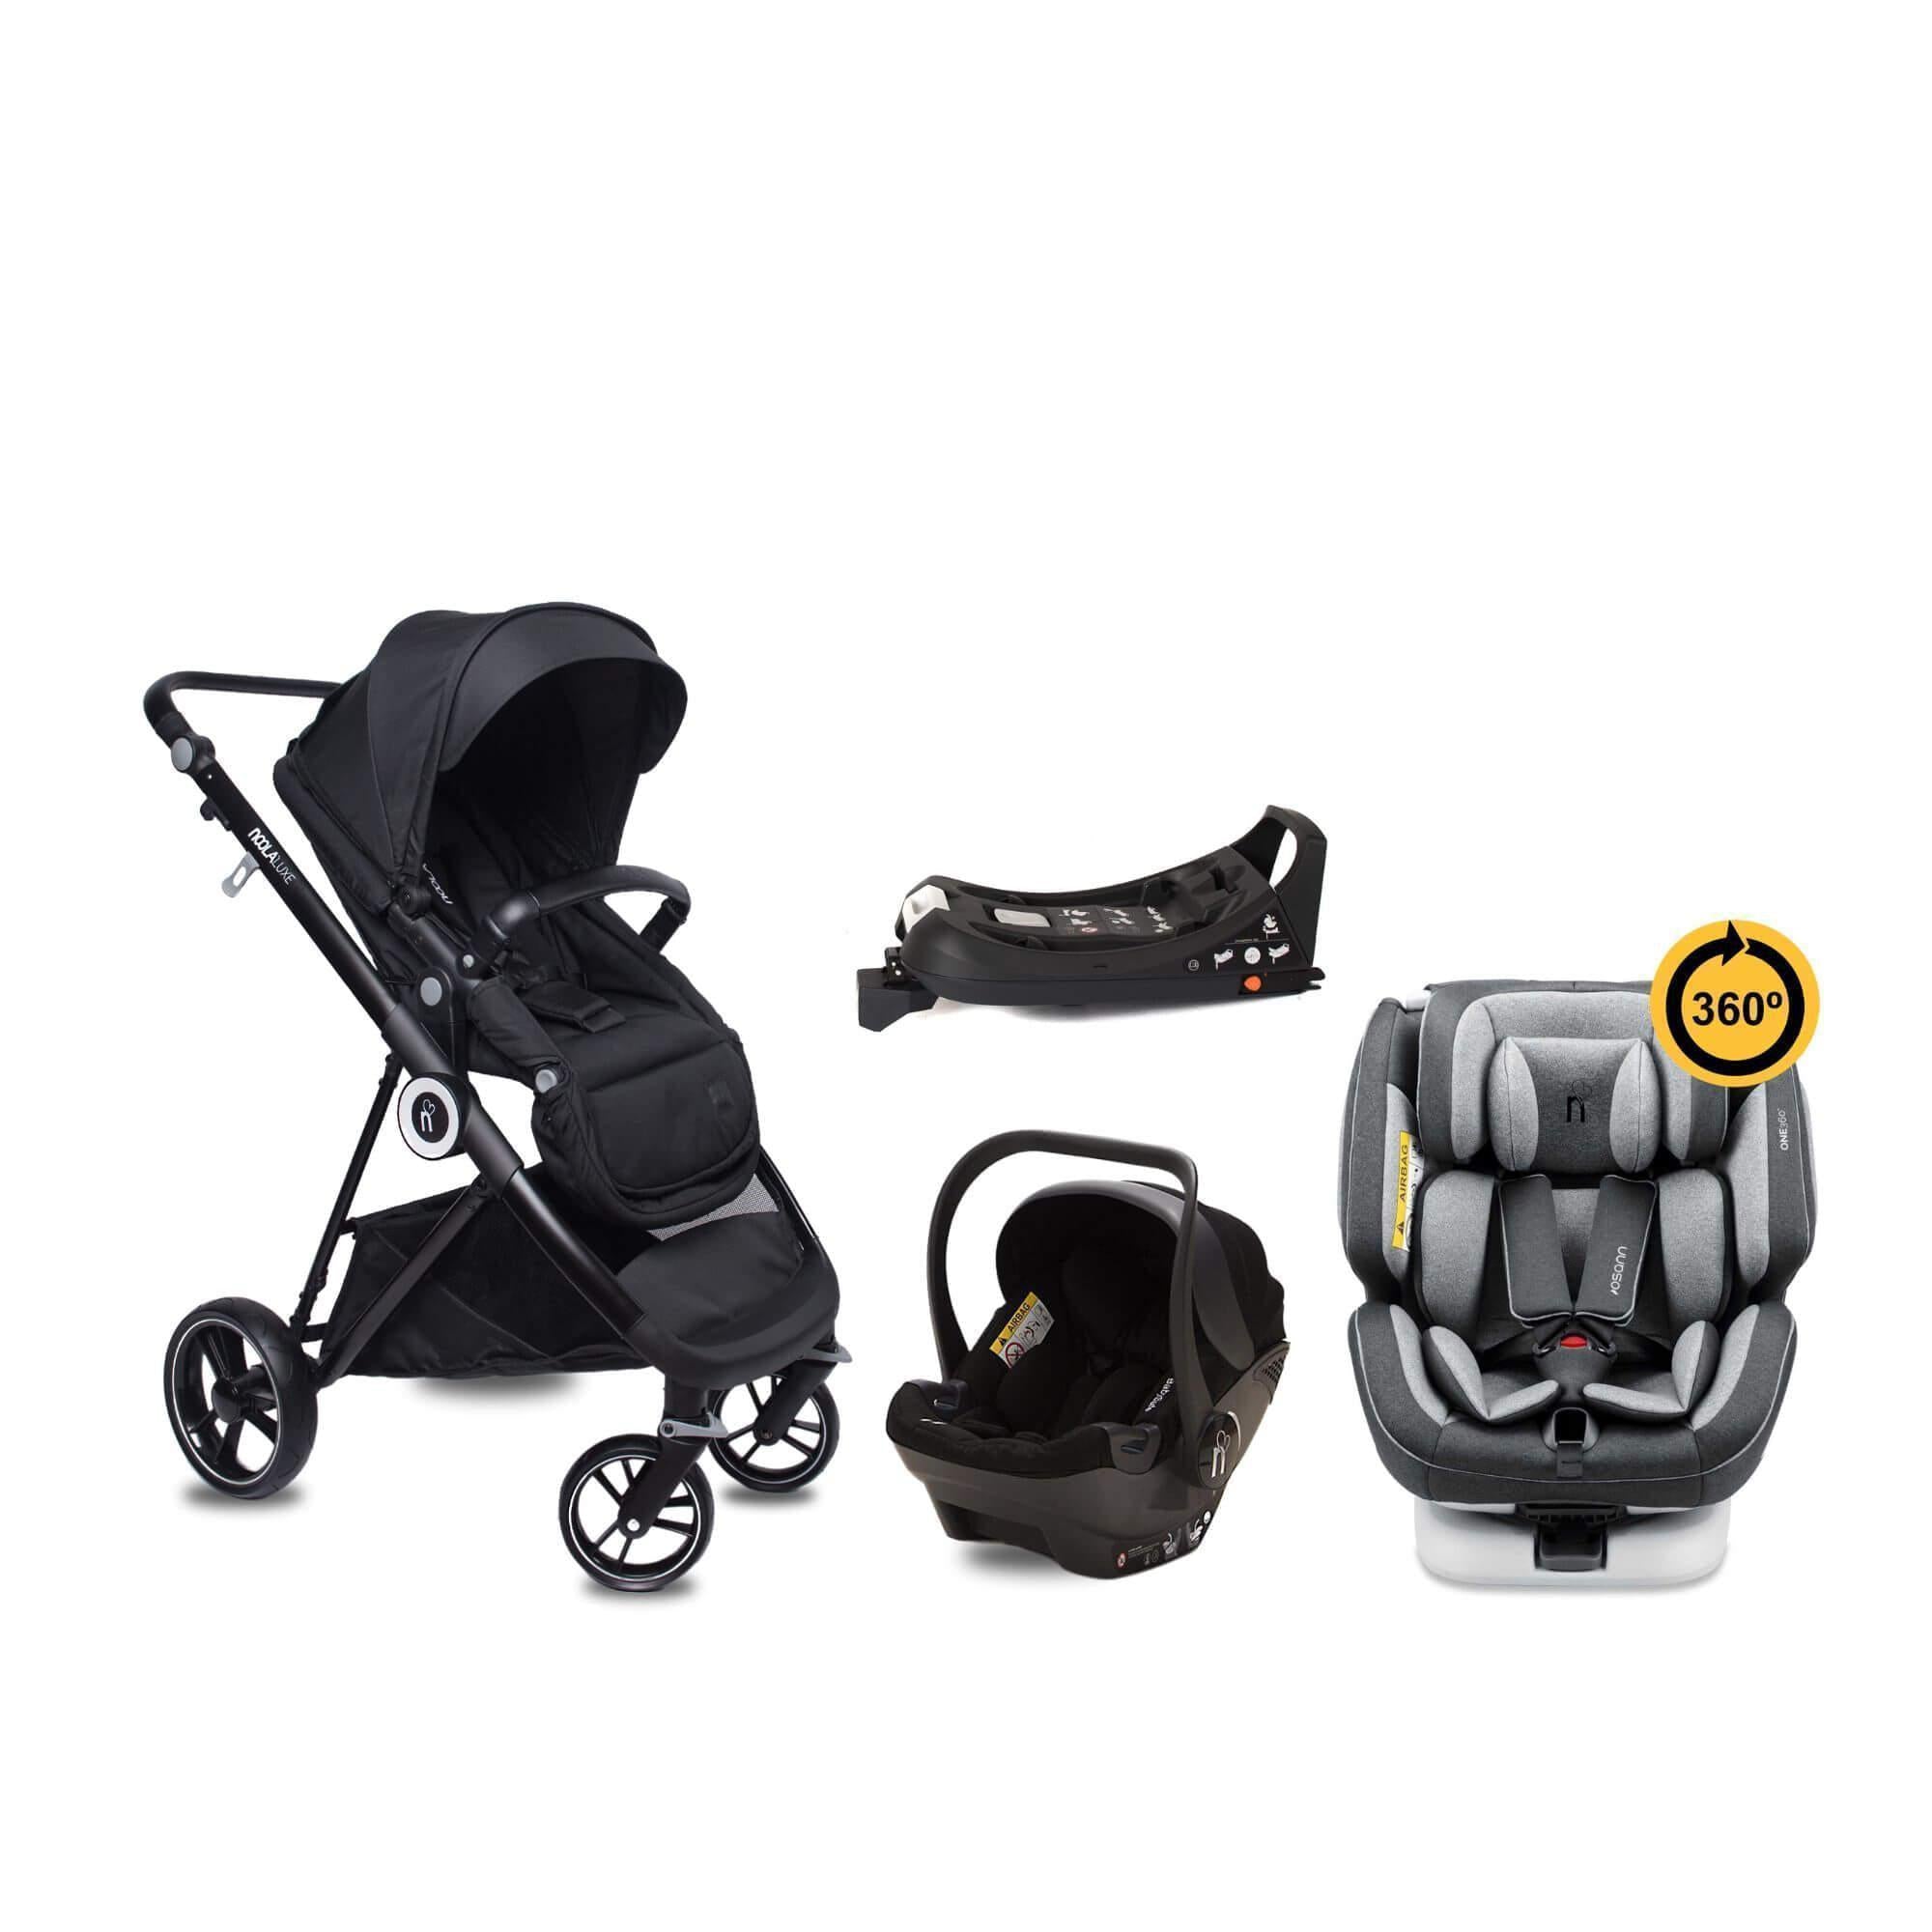 noola luxe 5in1 baby stroller midnight black #SELECT THE COLOUR OF YOUR ONE360_ONE360 | LUNAR GREY